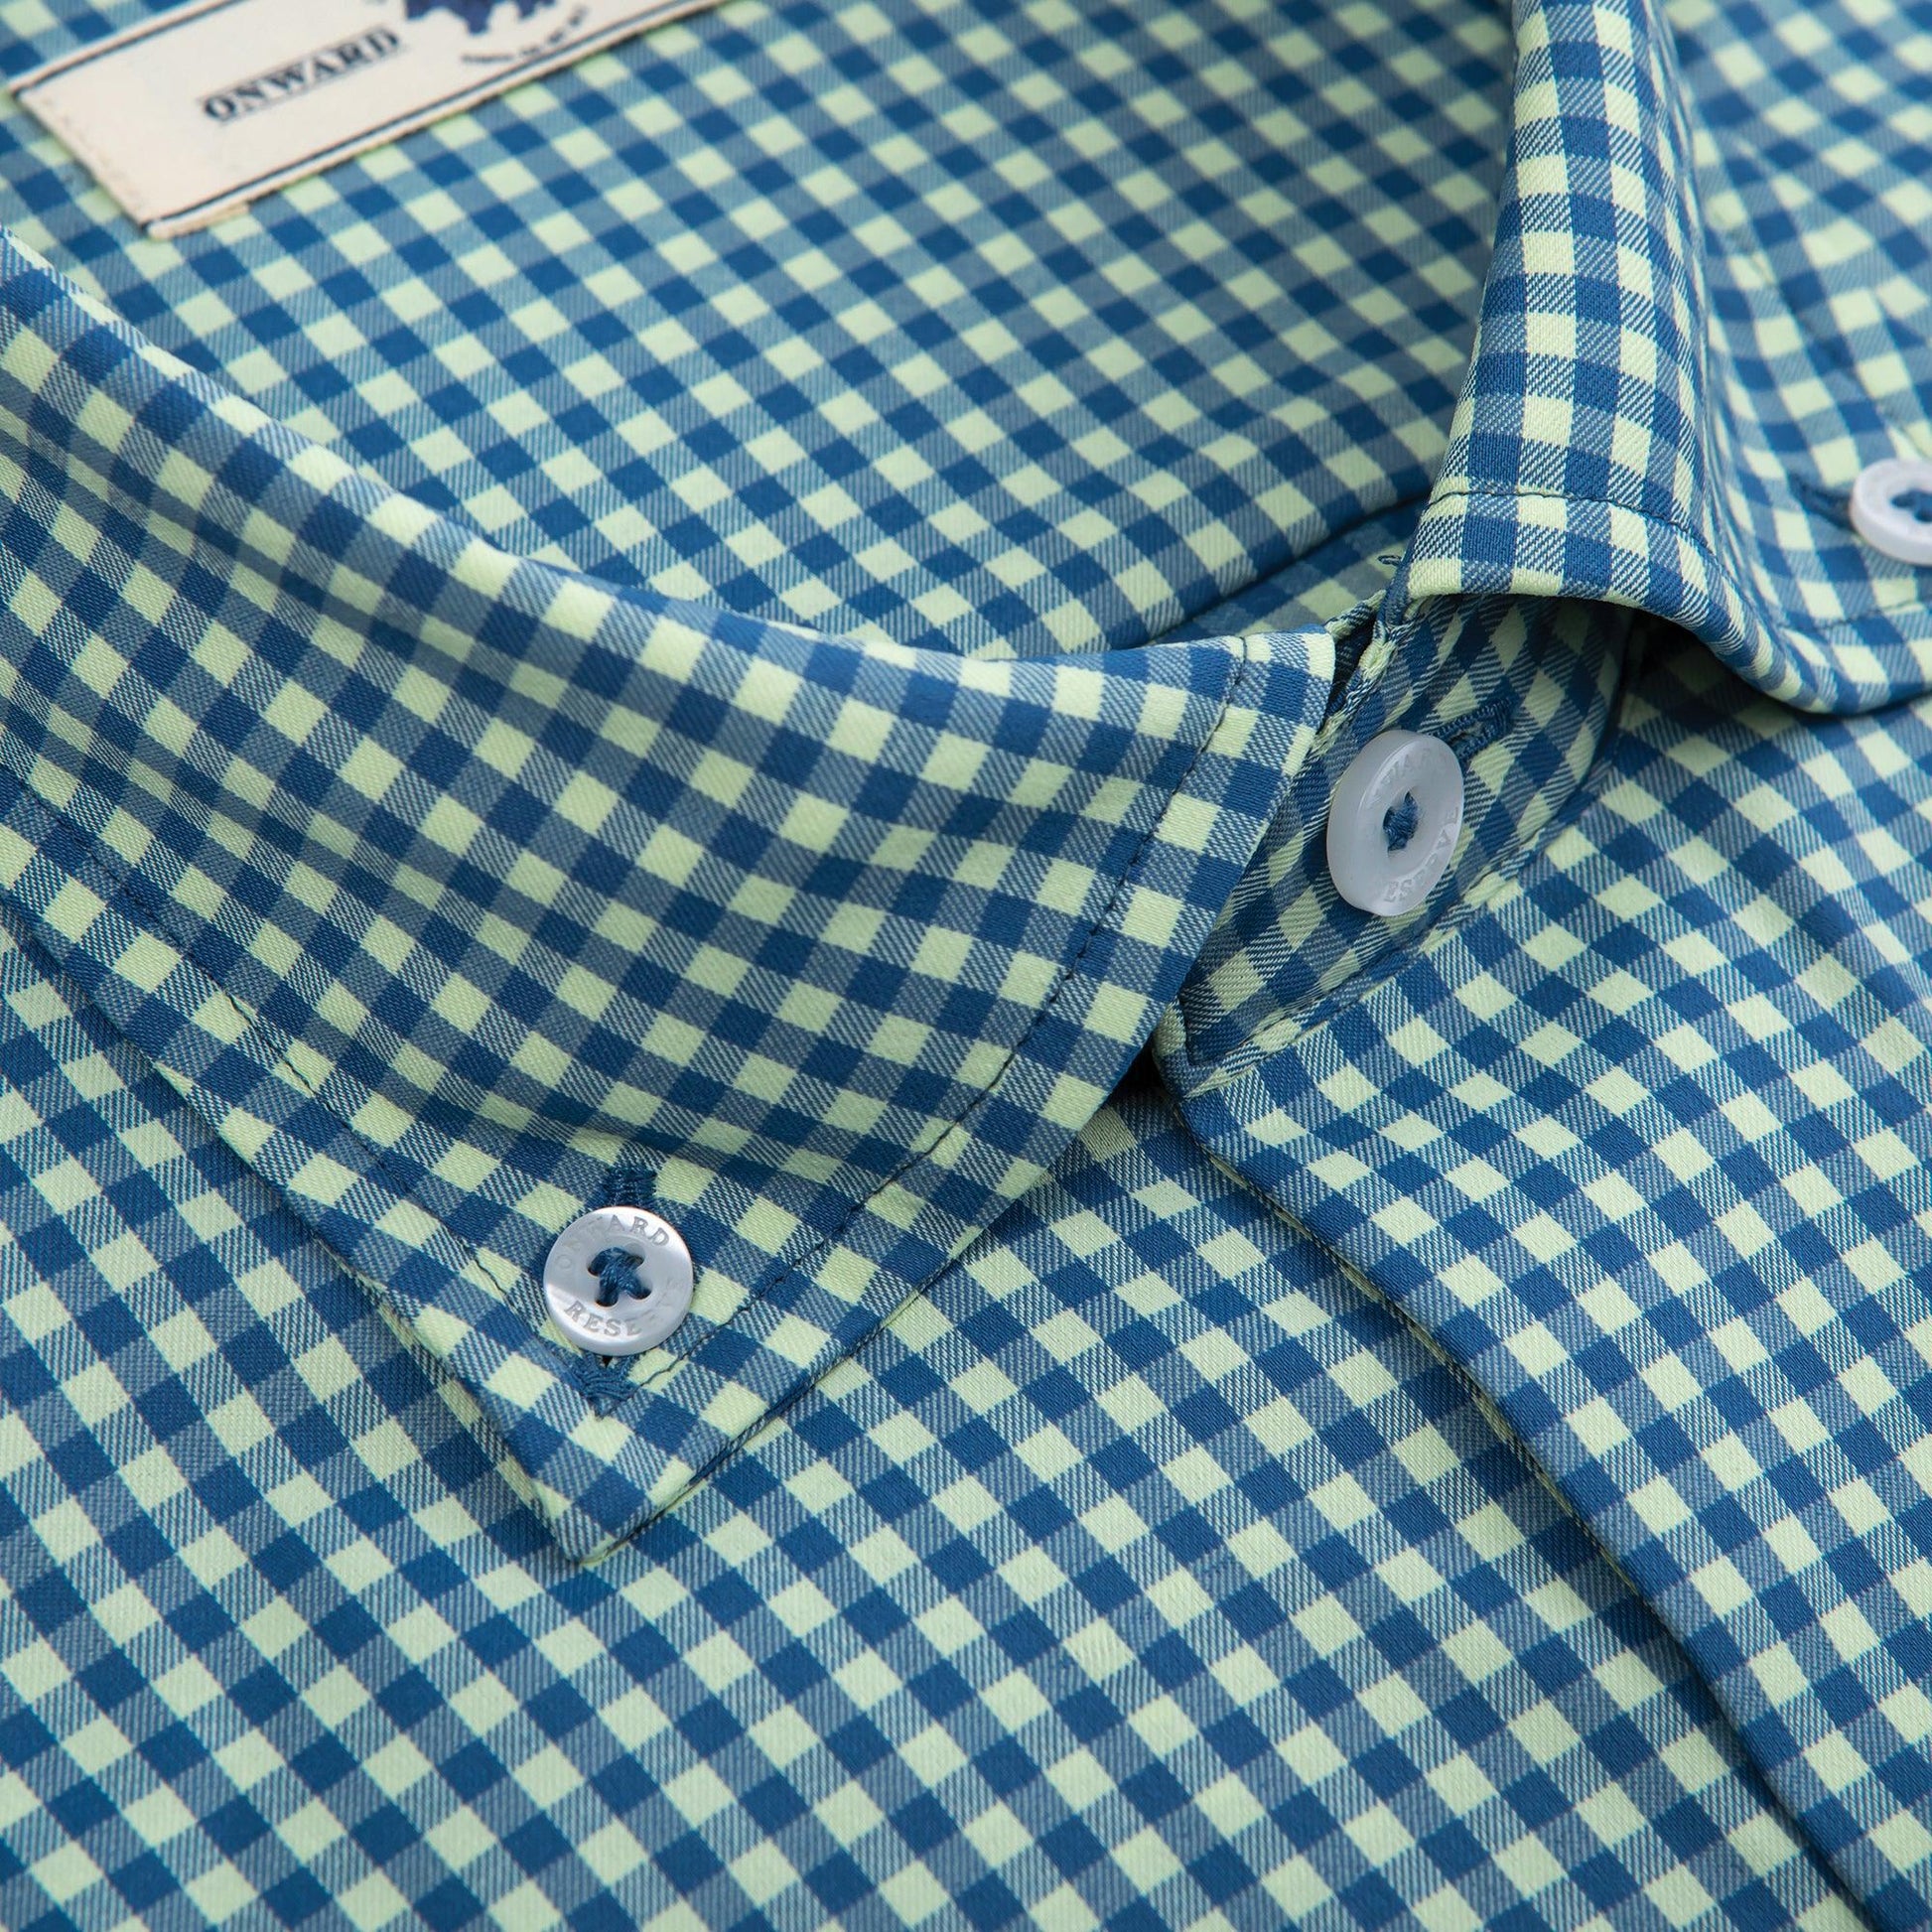 Revels Tailored Fit Performance Button Down - Onward Reserve